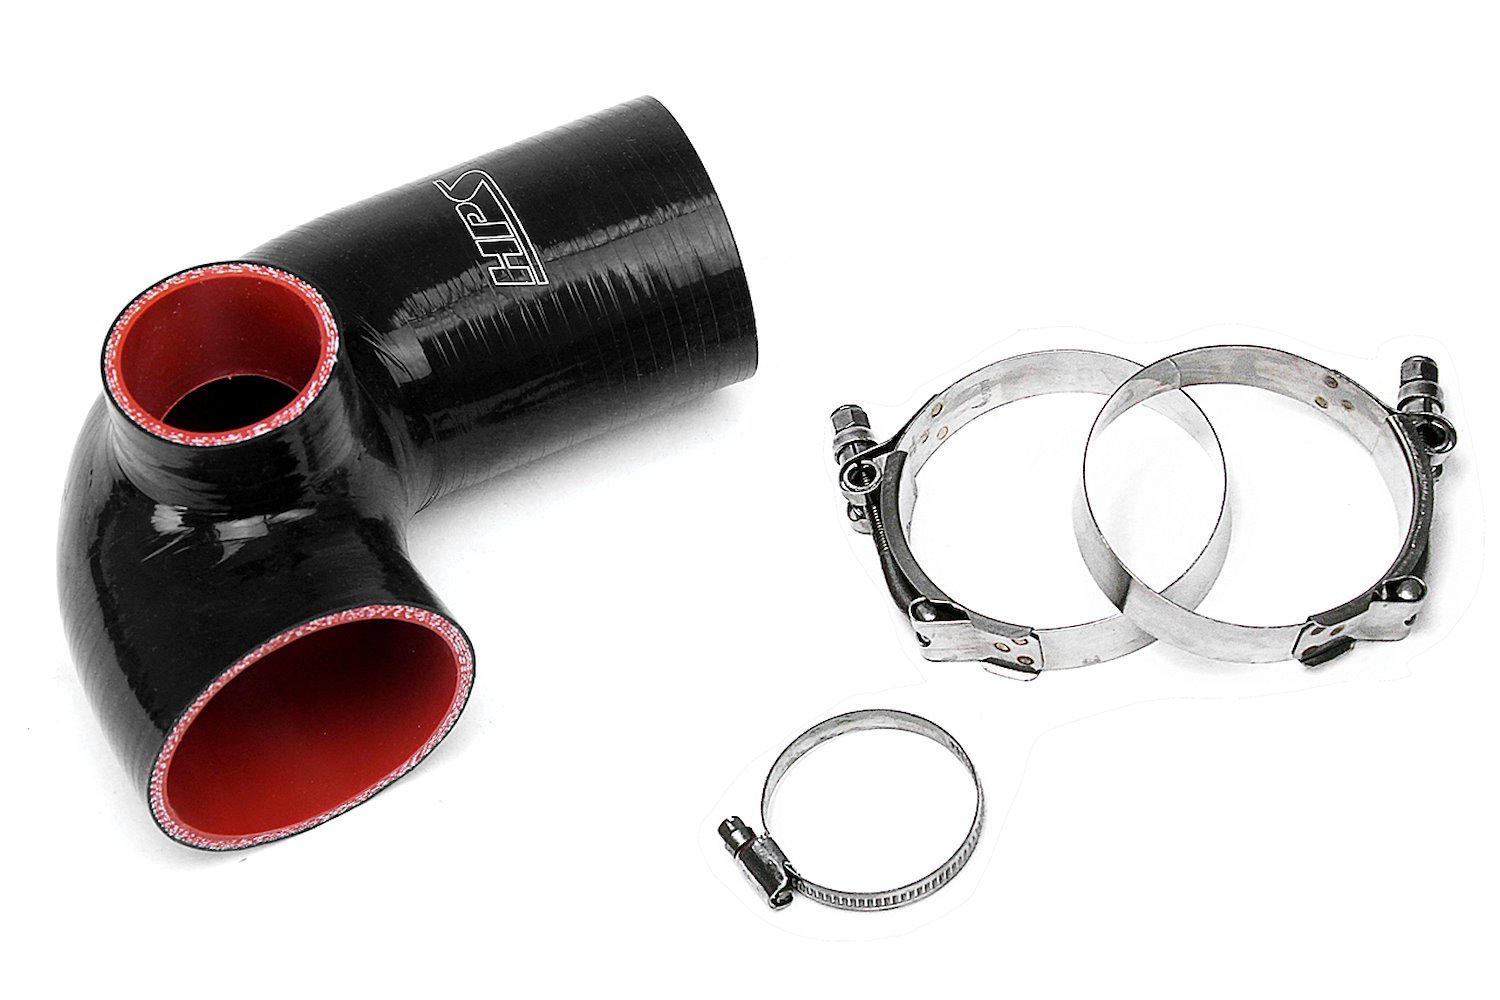 57-1494-BLK Silicone Air Intake, Replace Stock Restrictive Air Intake, Improve Throttle Response, No Heat Soak